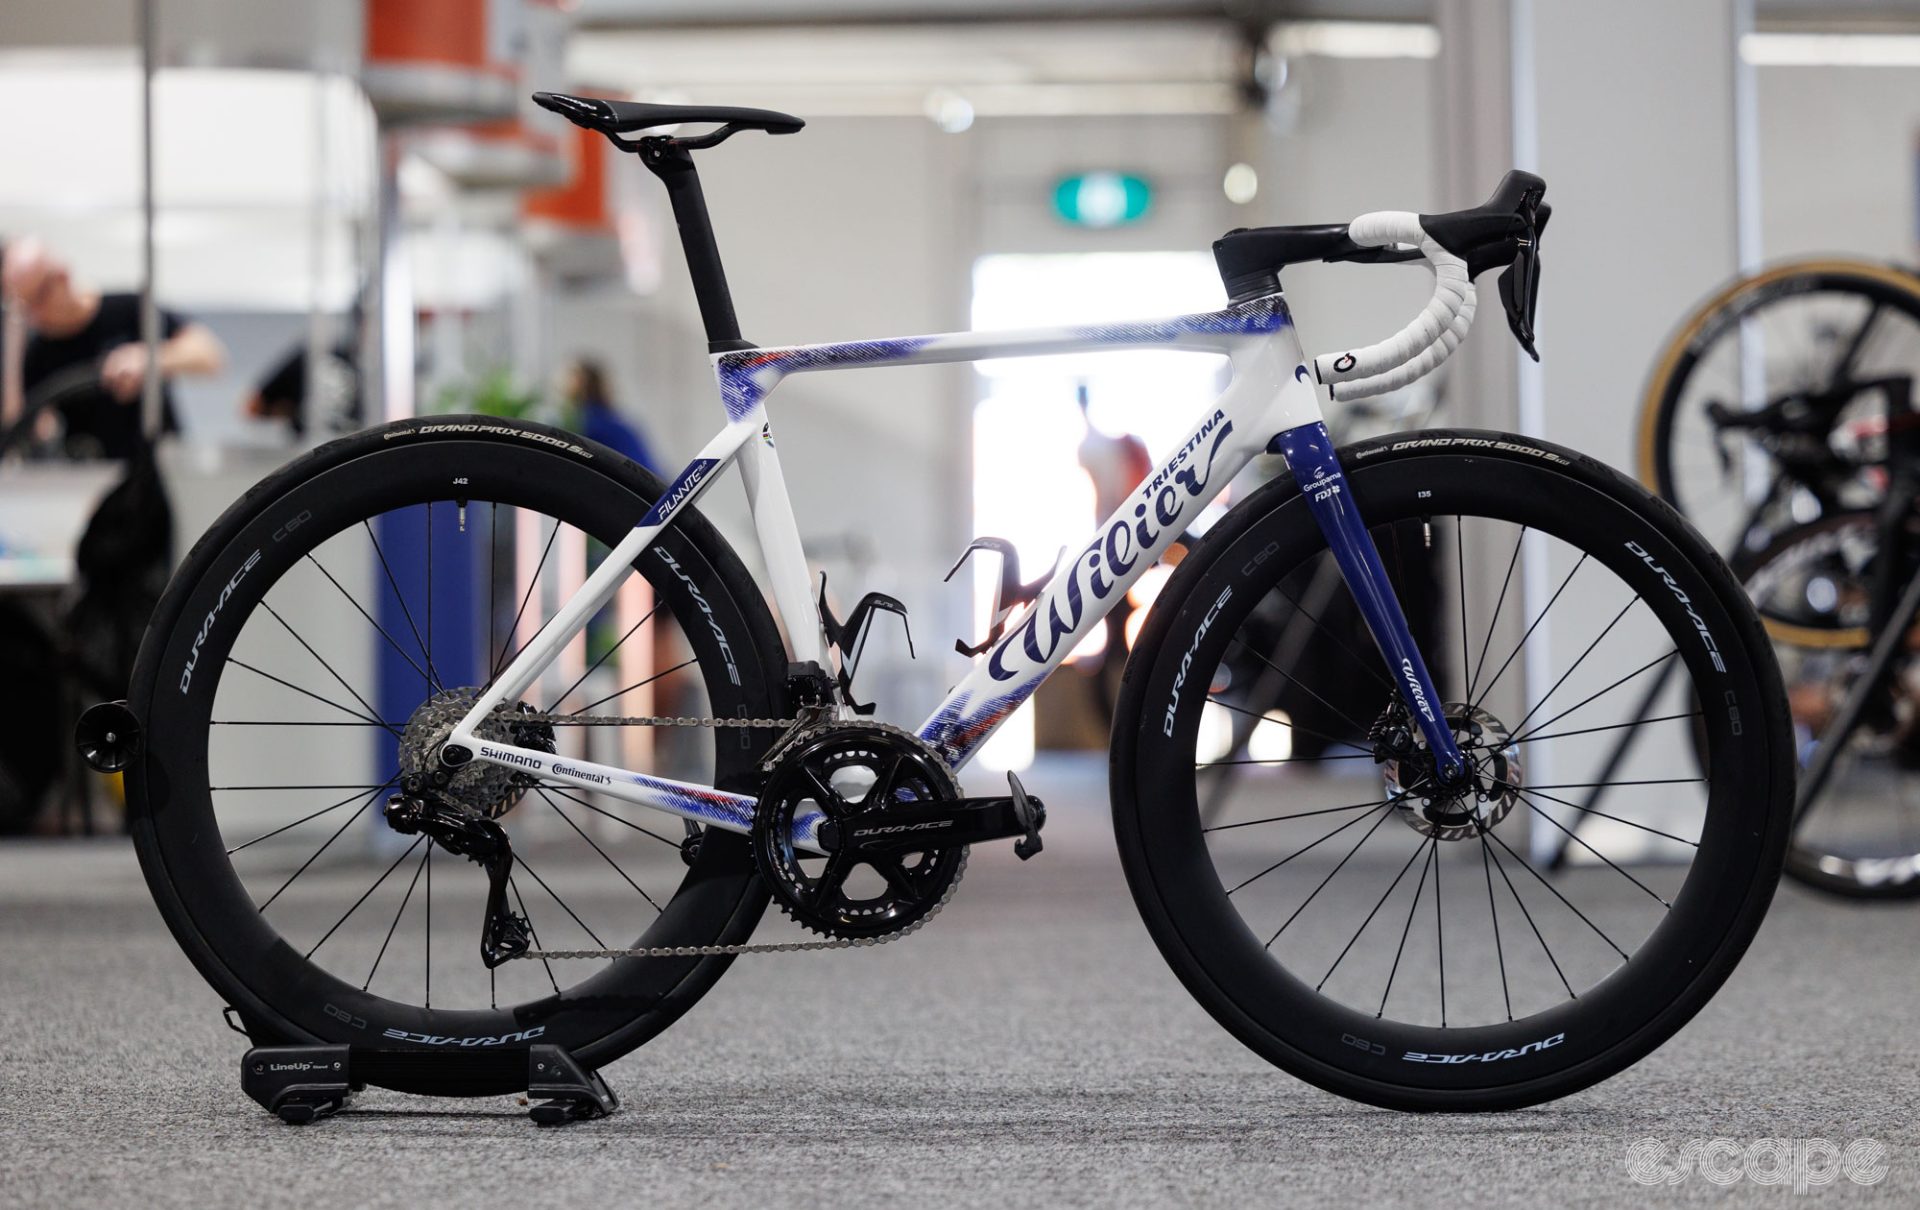 The white Wilier of Groupama-FDJ features blue accents and a fork. It's a soup-to-nuts Dura-Ace build.